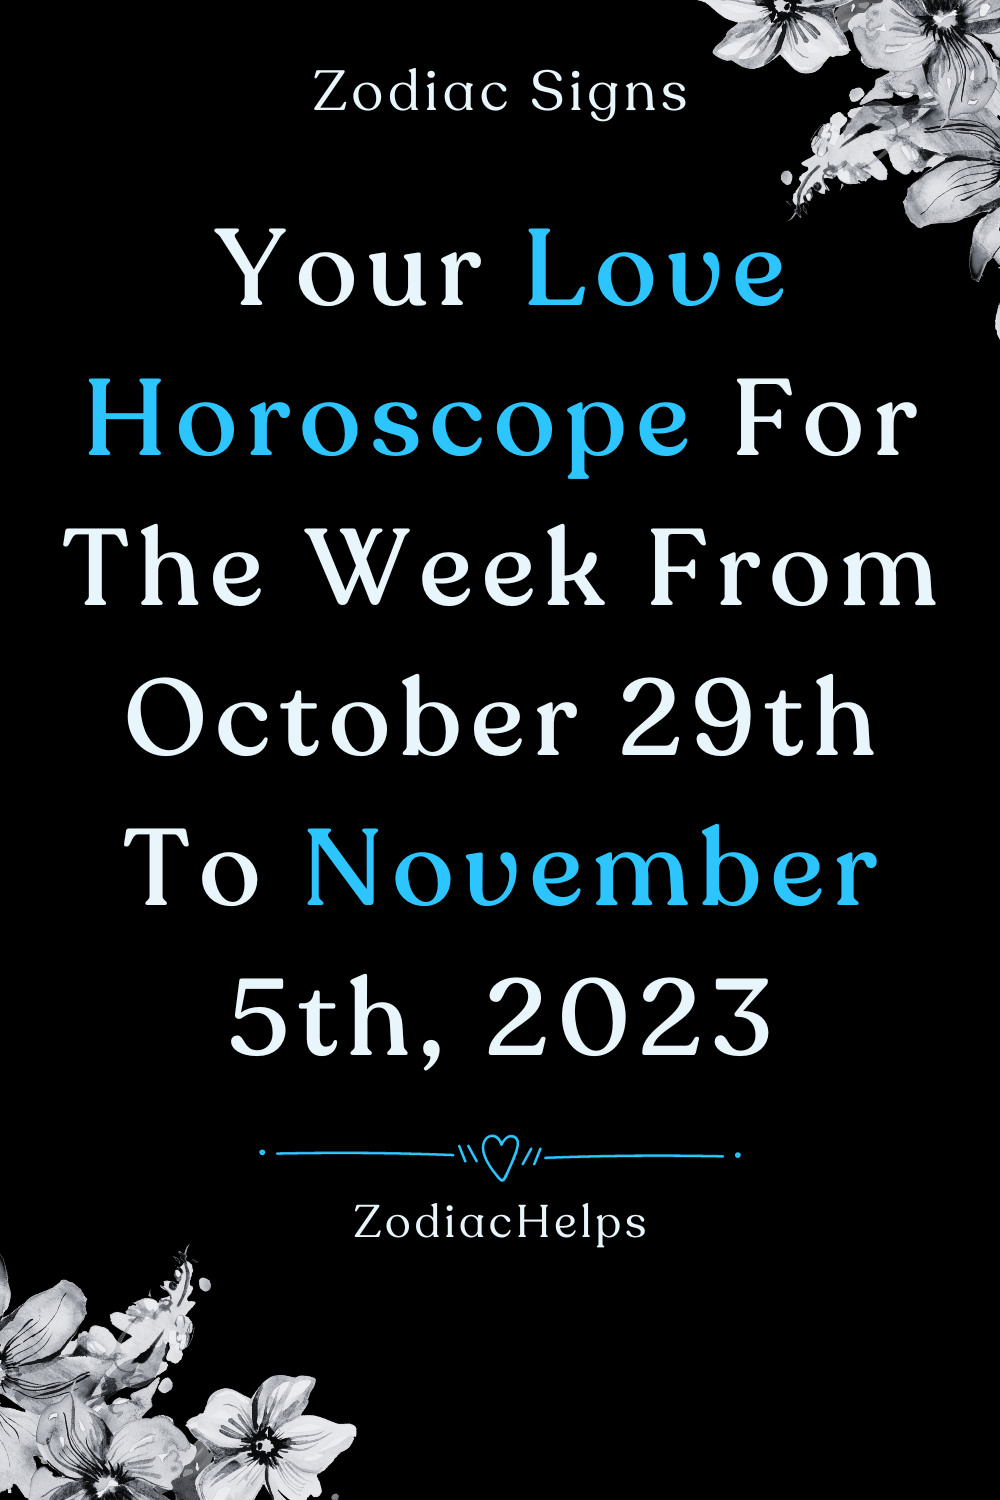 Your Love Horoscope For The Week From October 29th To November 5th, 2023